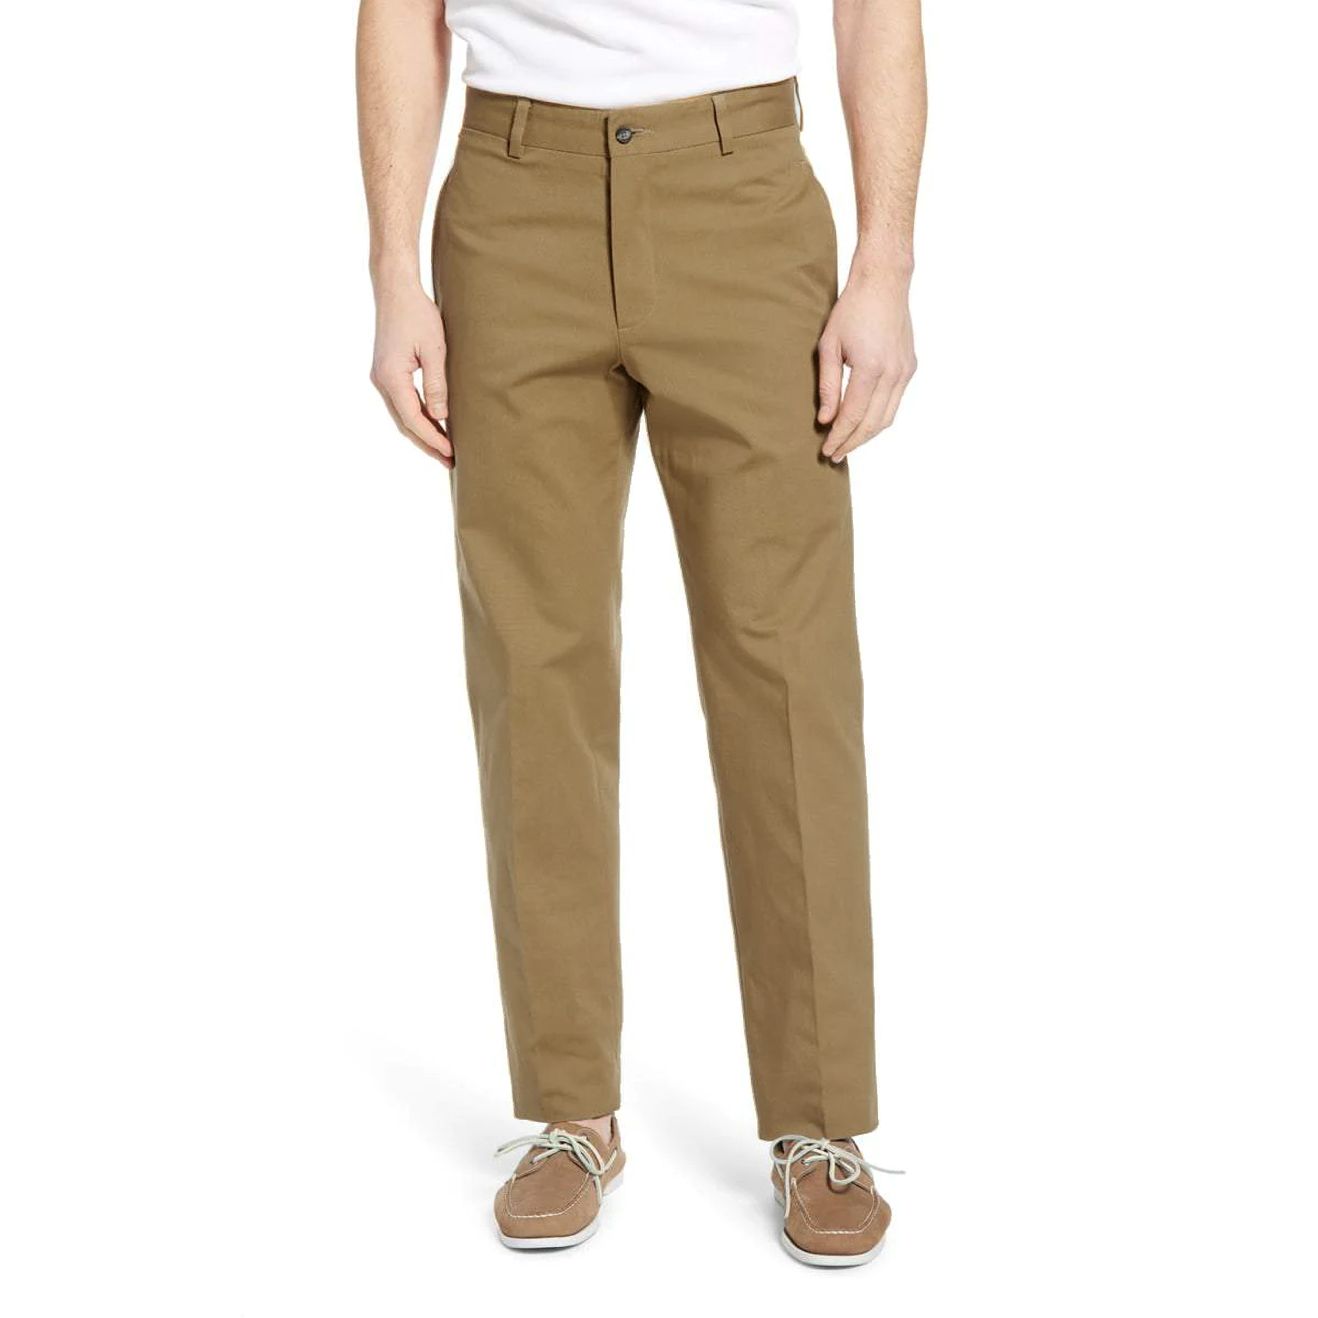 Washed Canvas Pant in British Tan (Sumpter Flat Front) by Charleston Khakis